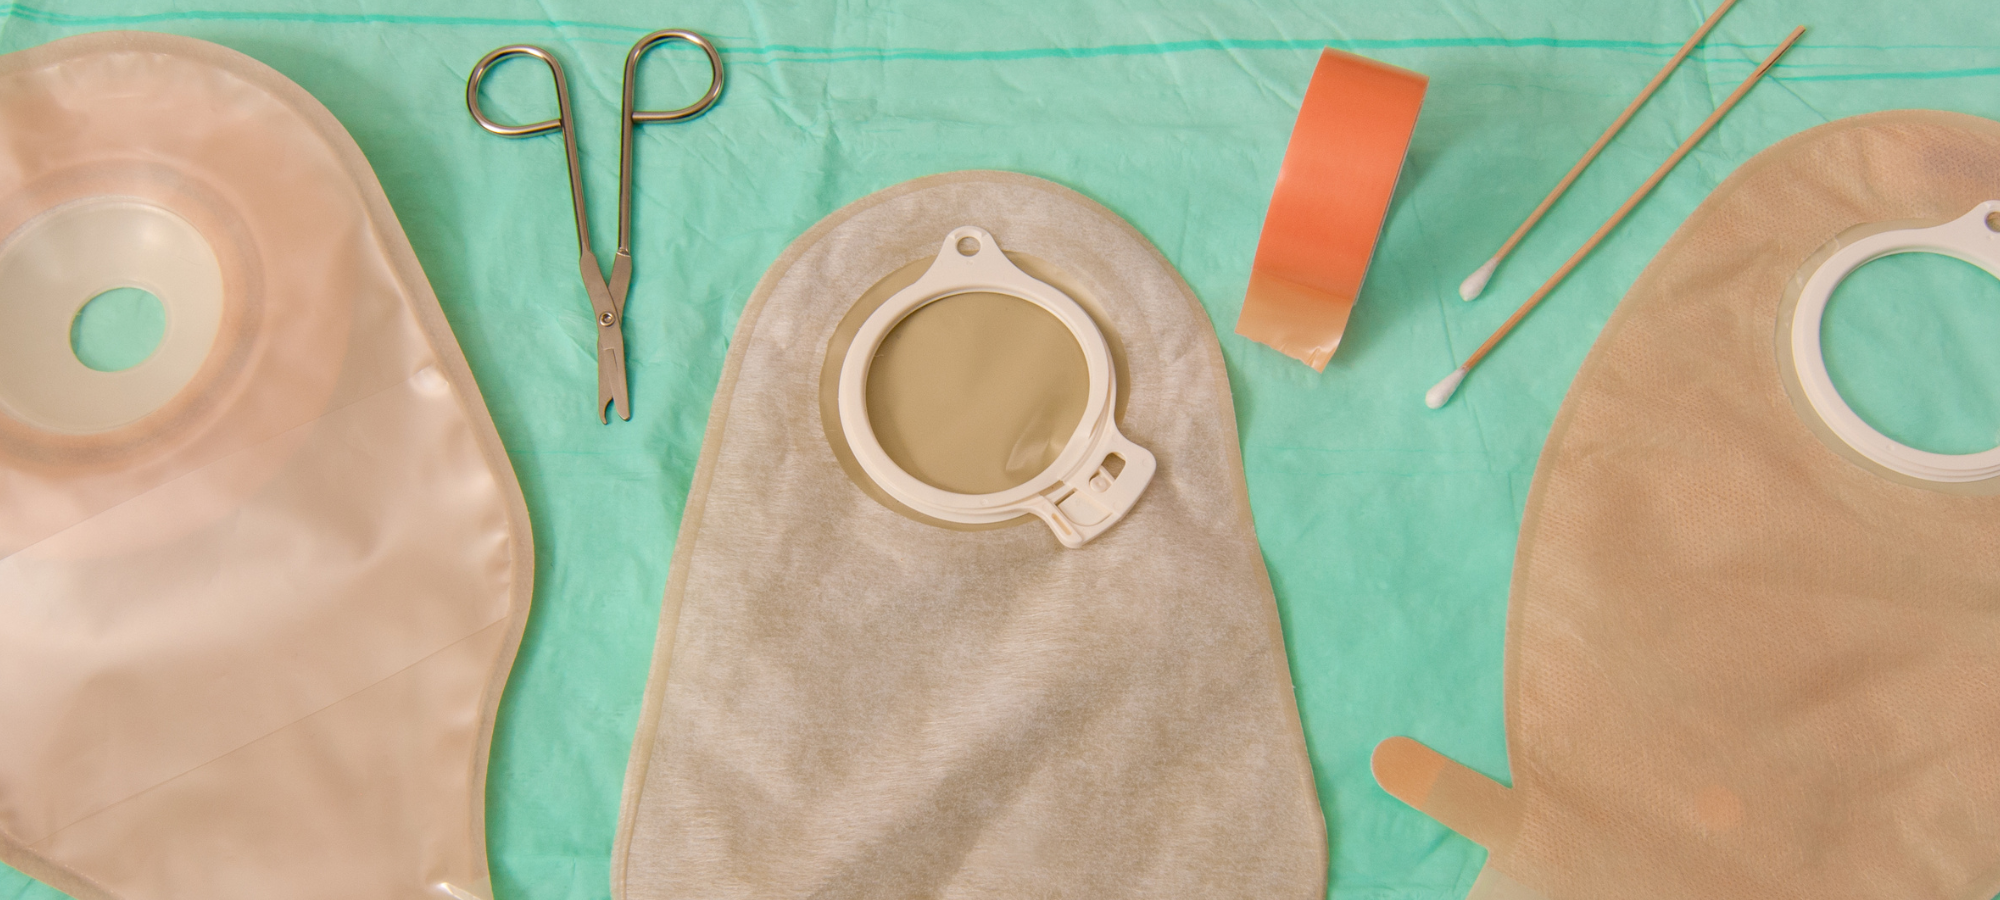 The internet's most asked questions about ostomy care